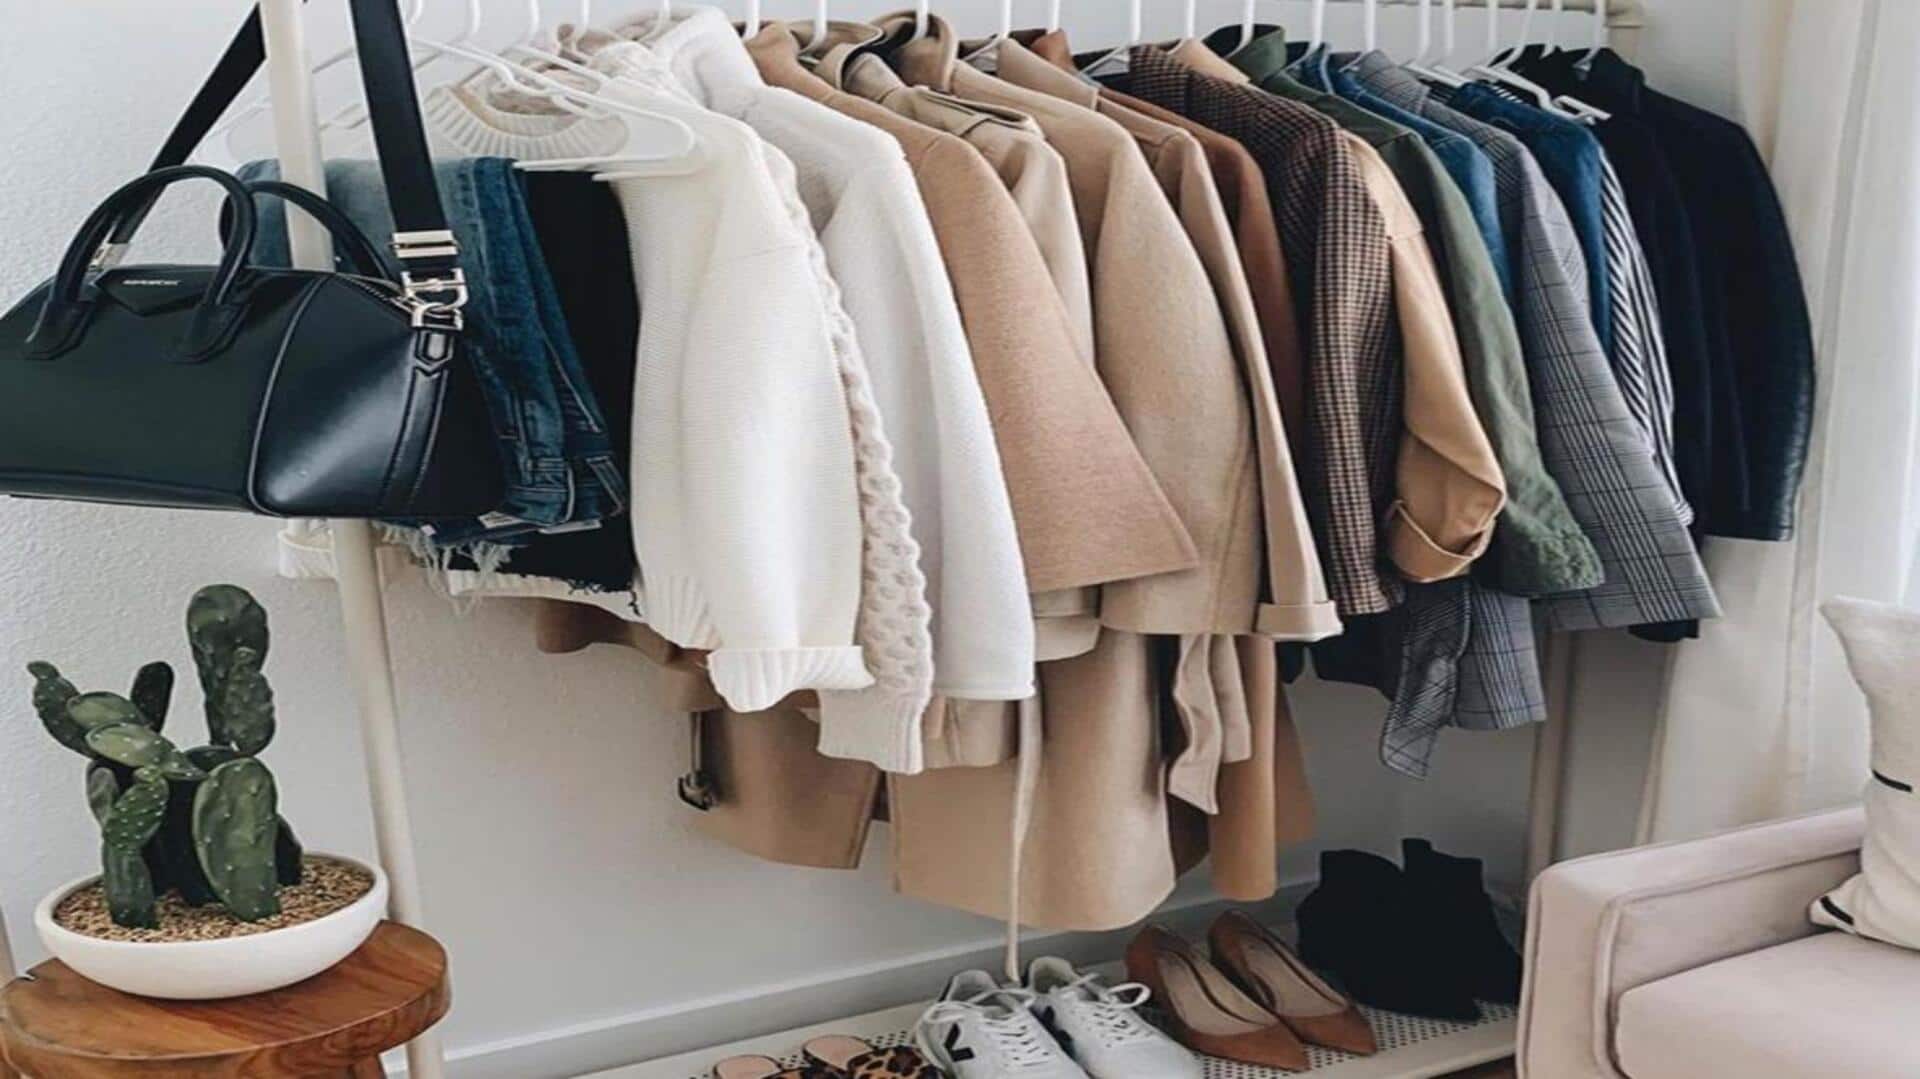 Ever heard of 'capsule wardrobe'? It helps you travel light